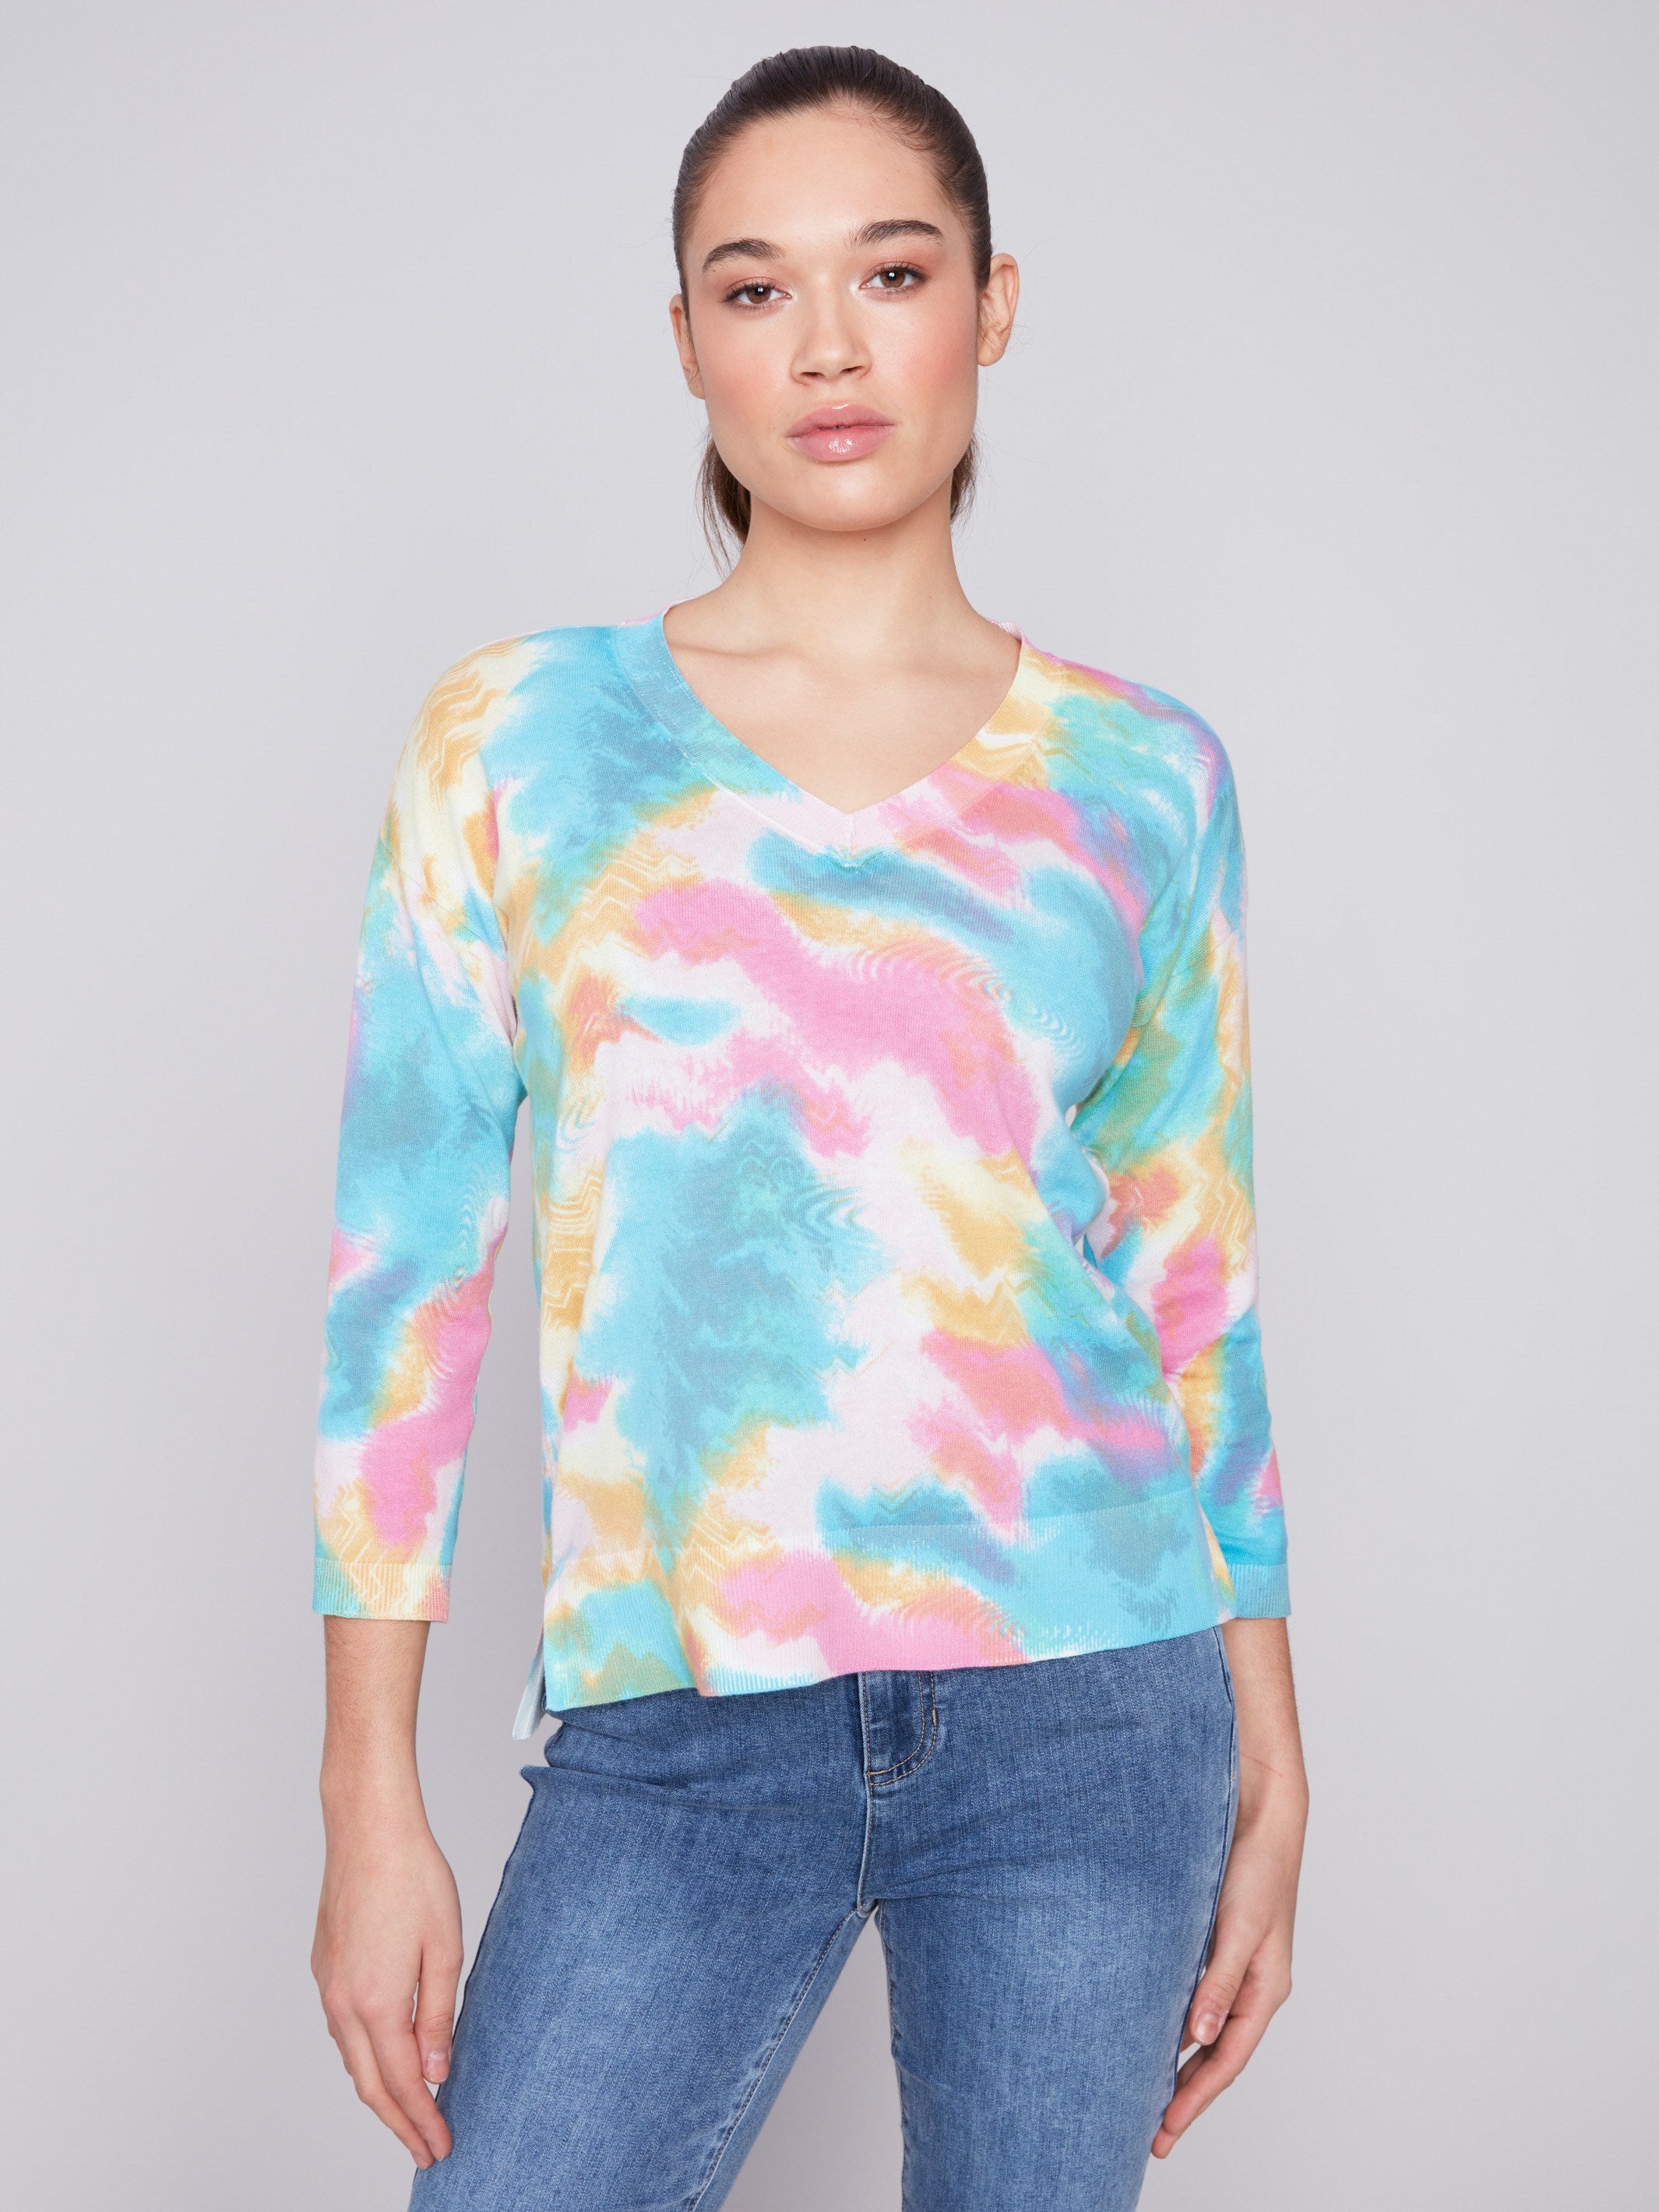 Reversible Cotton Sweater - Multicolor - Charlie B Collection Canada - Image 2